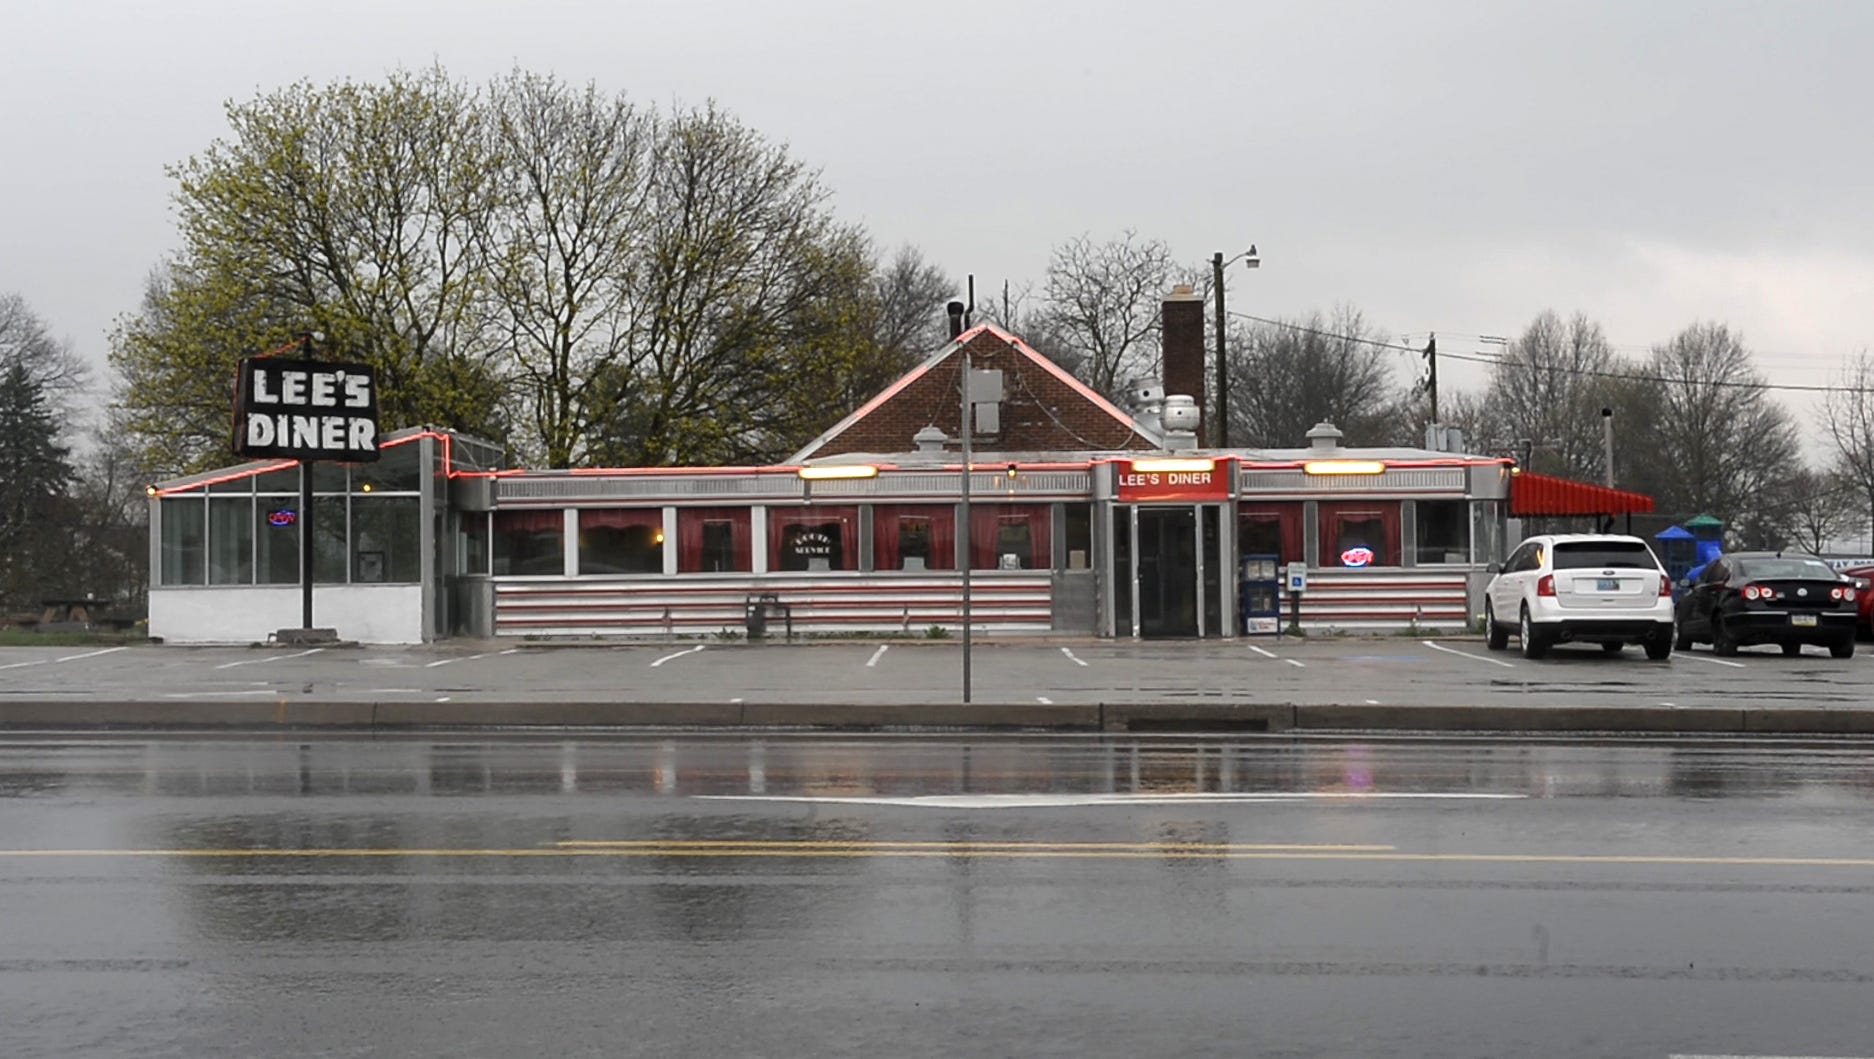 Lee's Diner restaurant inspections: Repeat failures bad for business